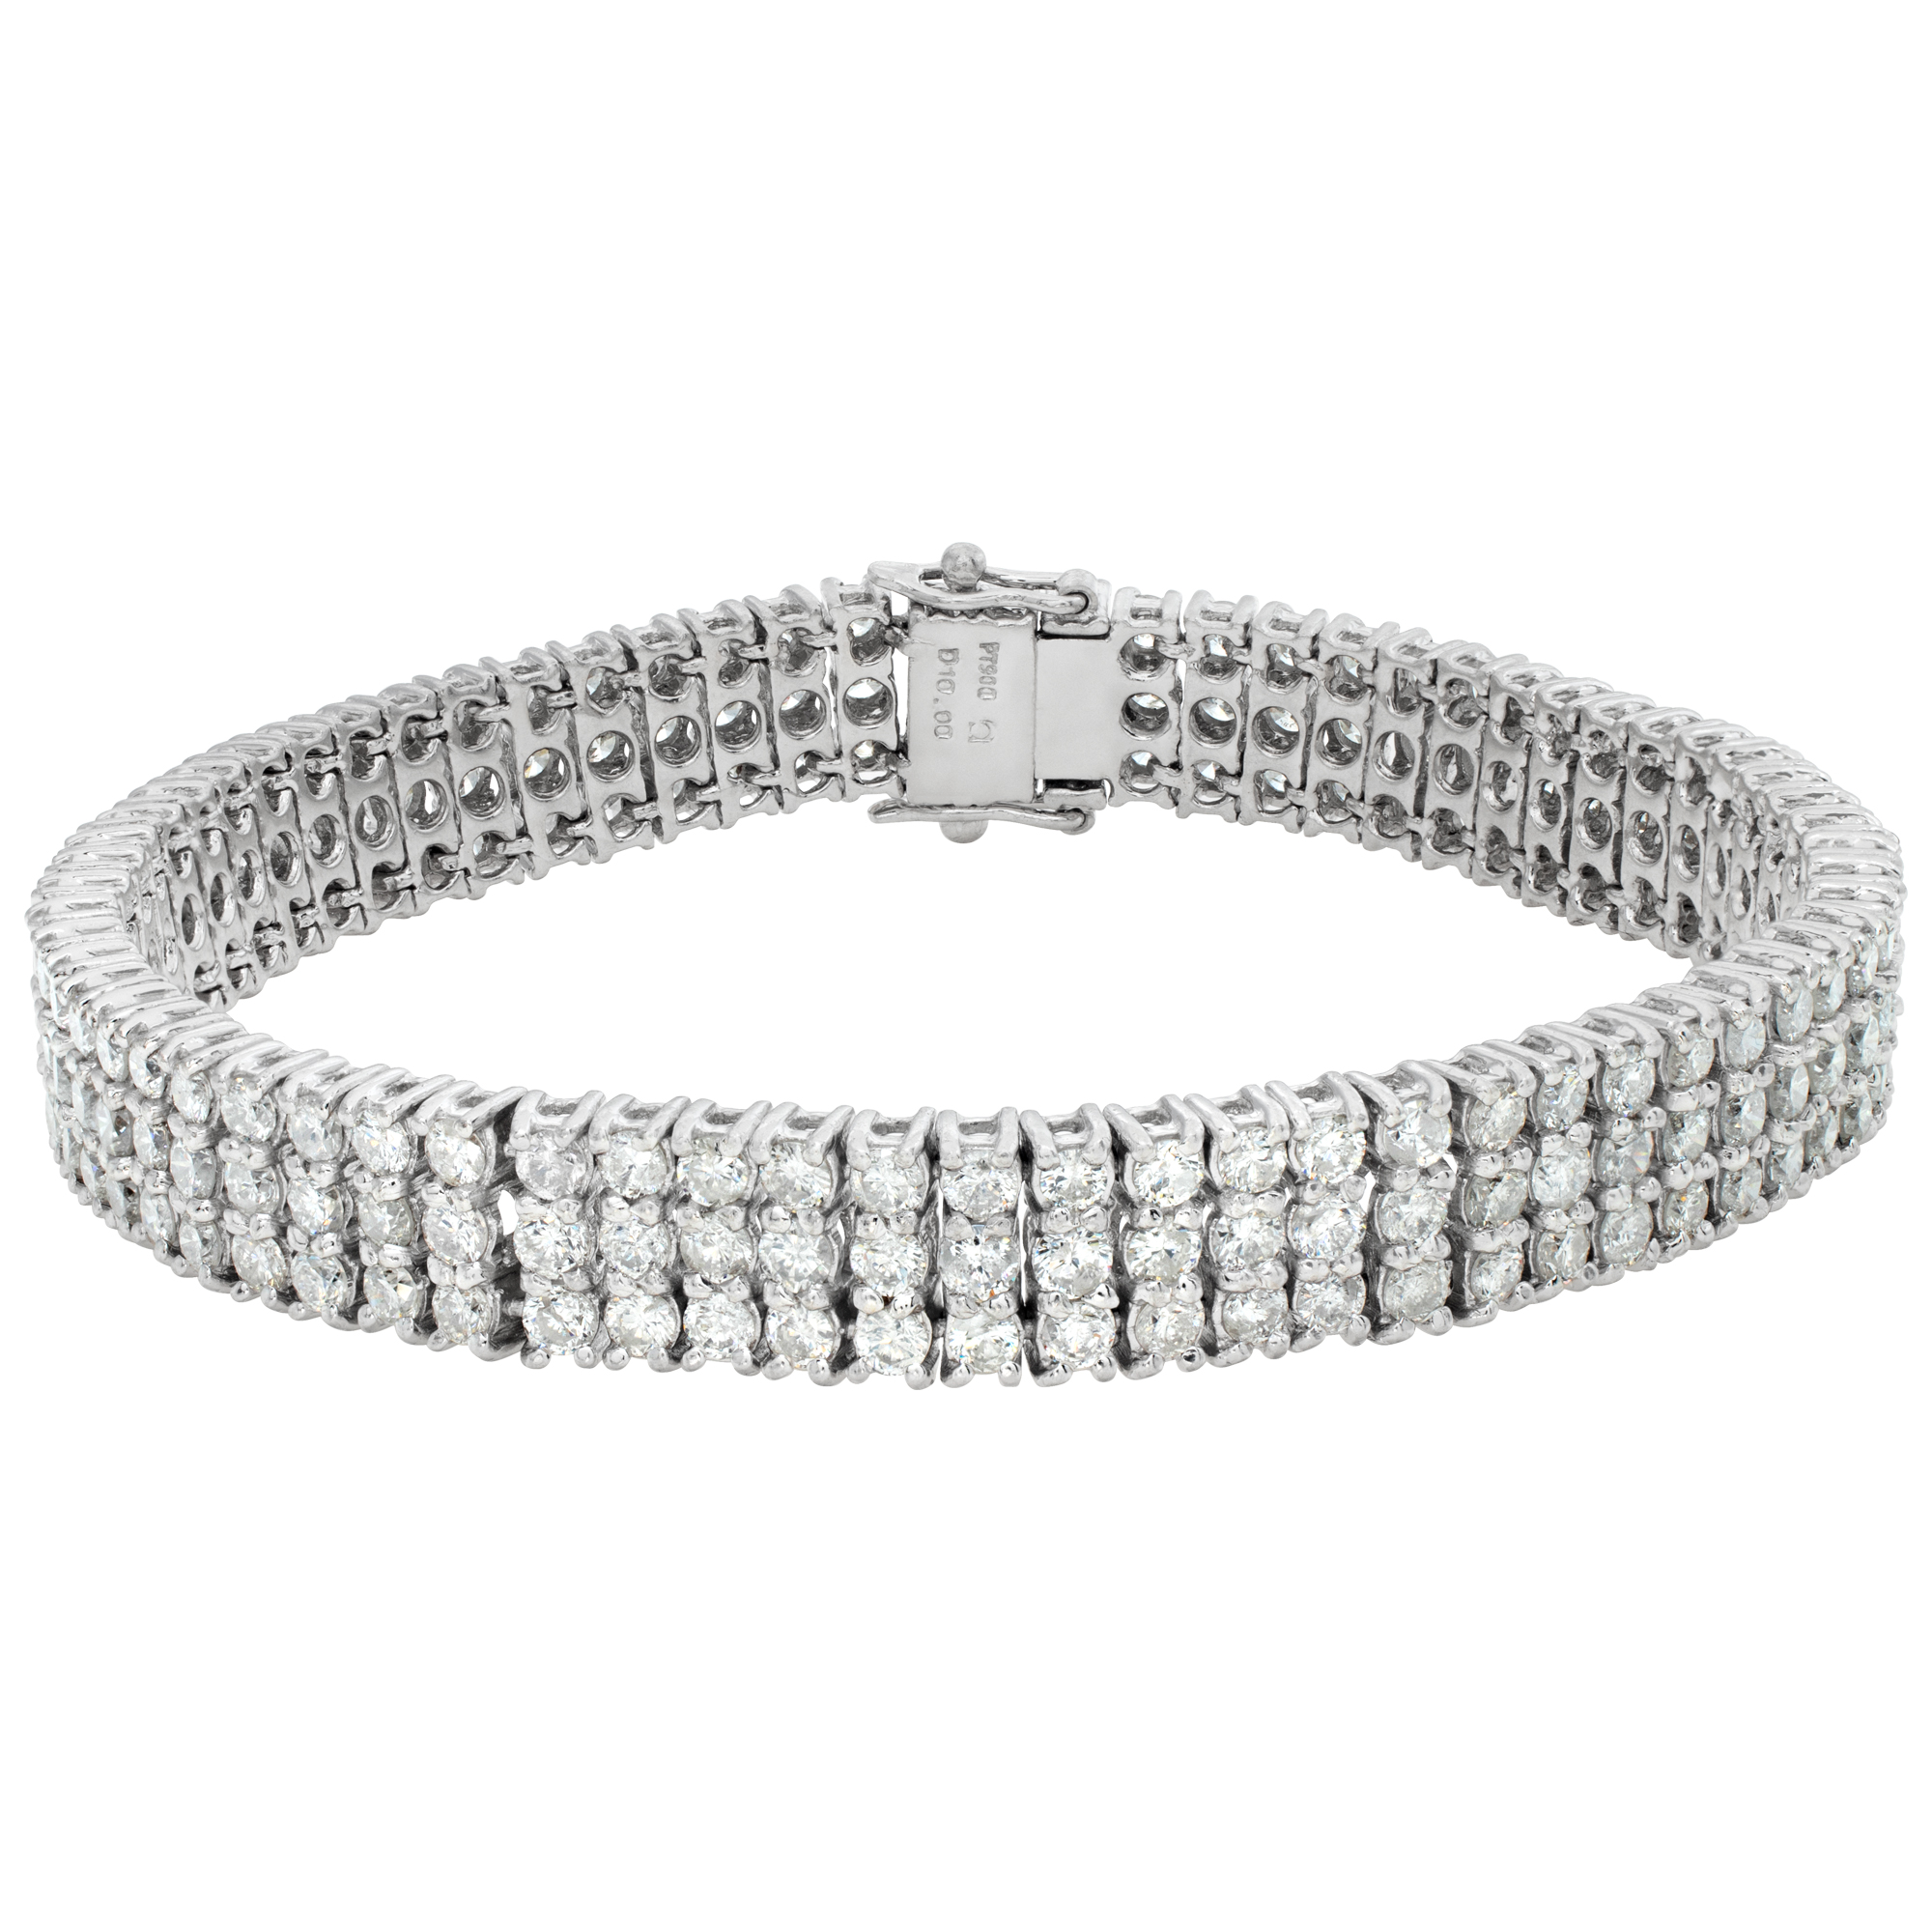 Platinum line bracelet with approx 10 carats in diamonds